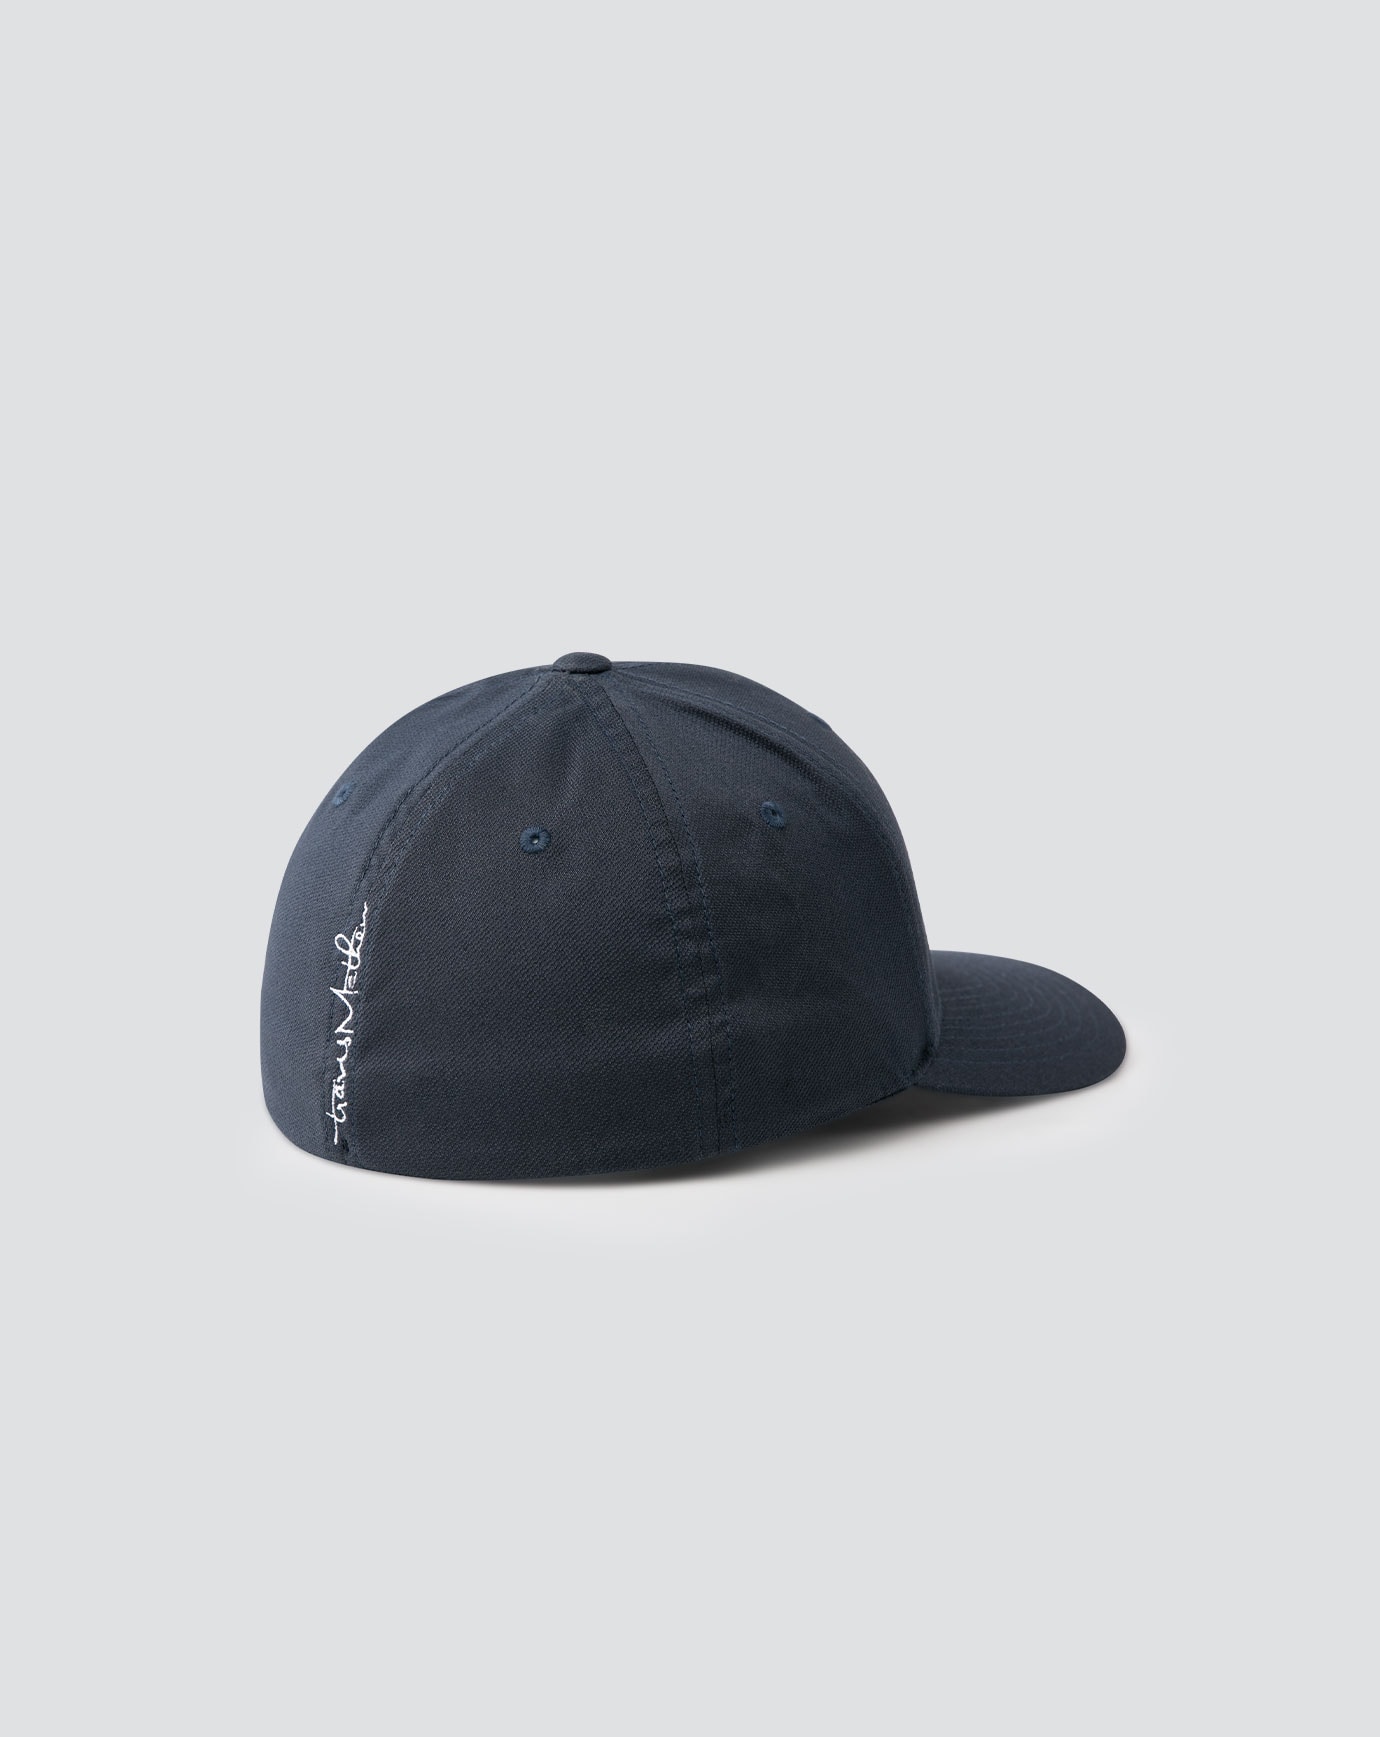 LINCOLN PARK FITTED HAT Image Thumbnail 3